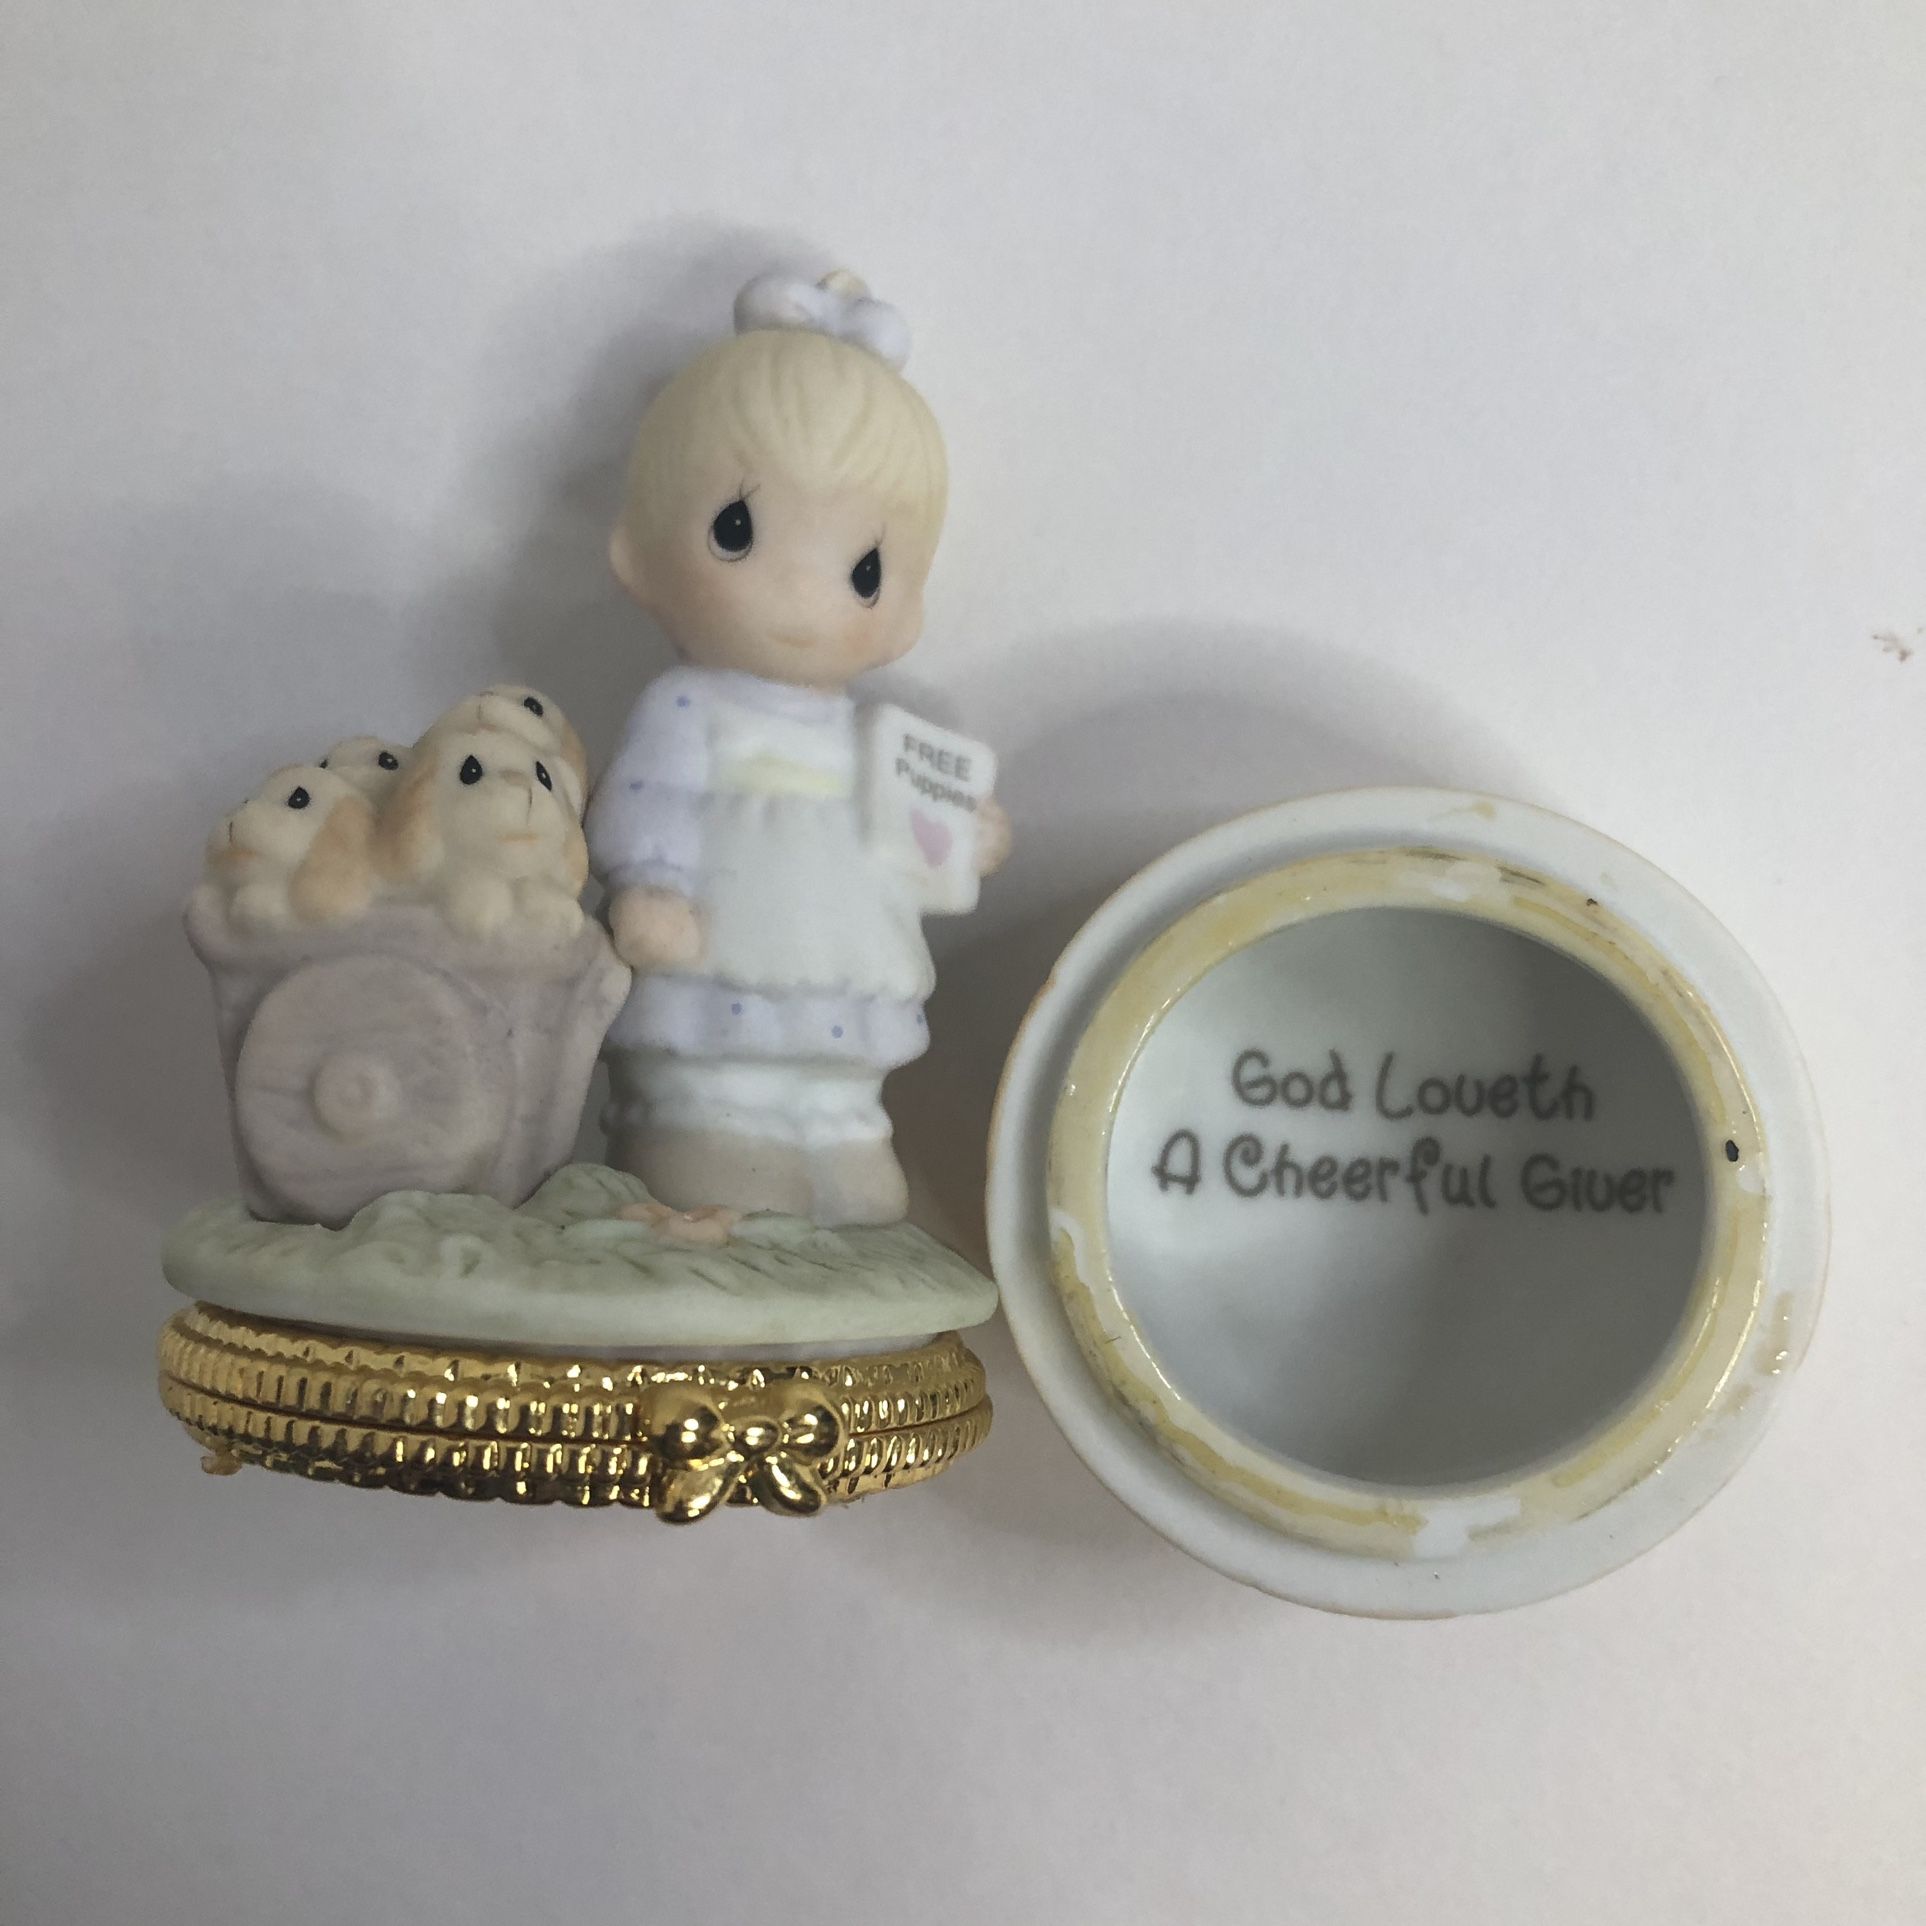 Precious Moments God Loveth A Cheerful Giver Jewelry Holder 1998